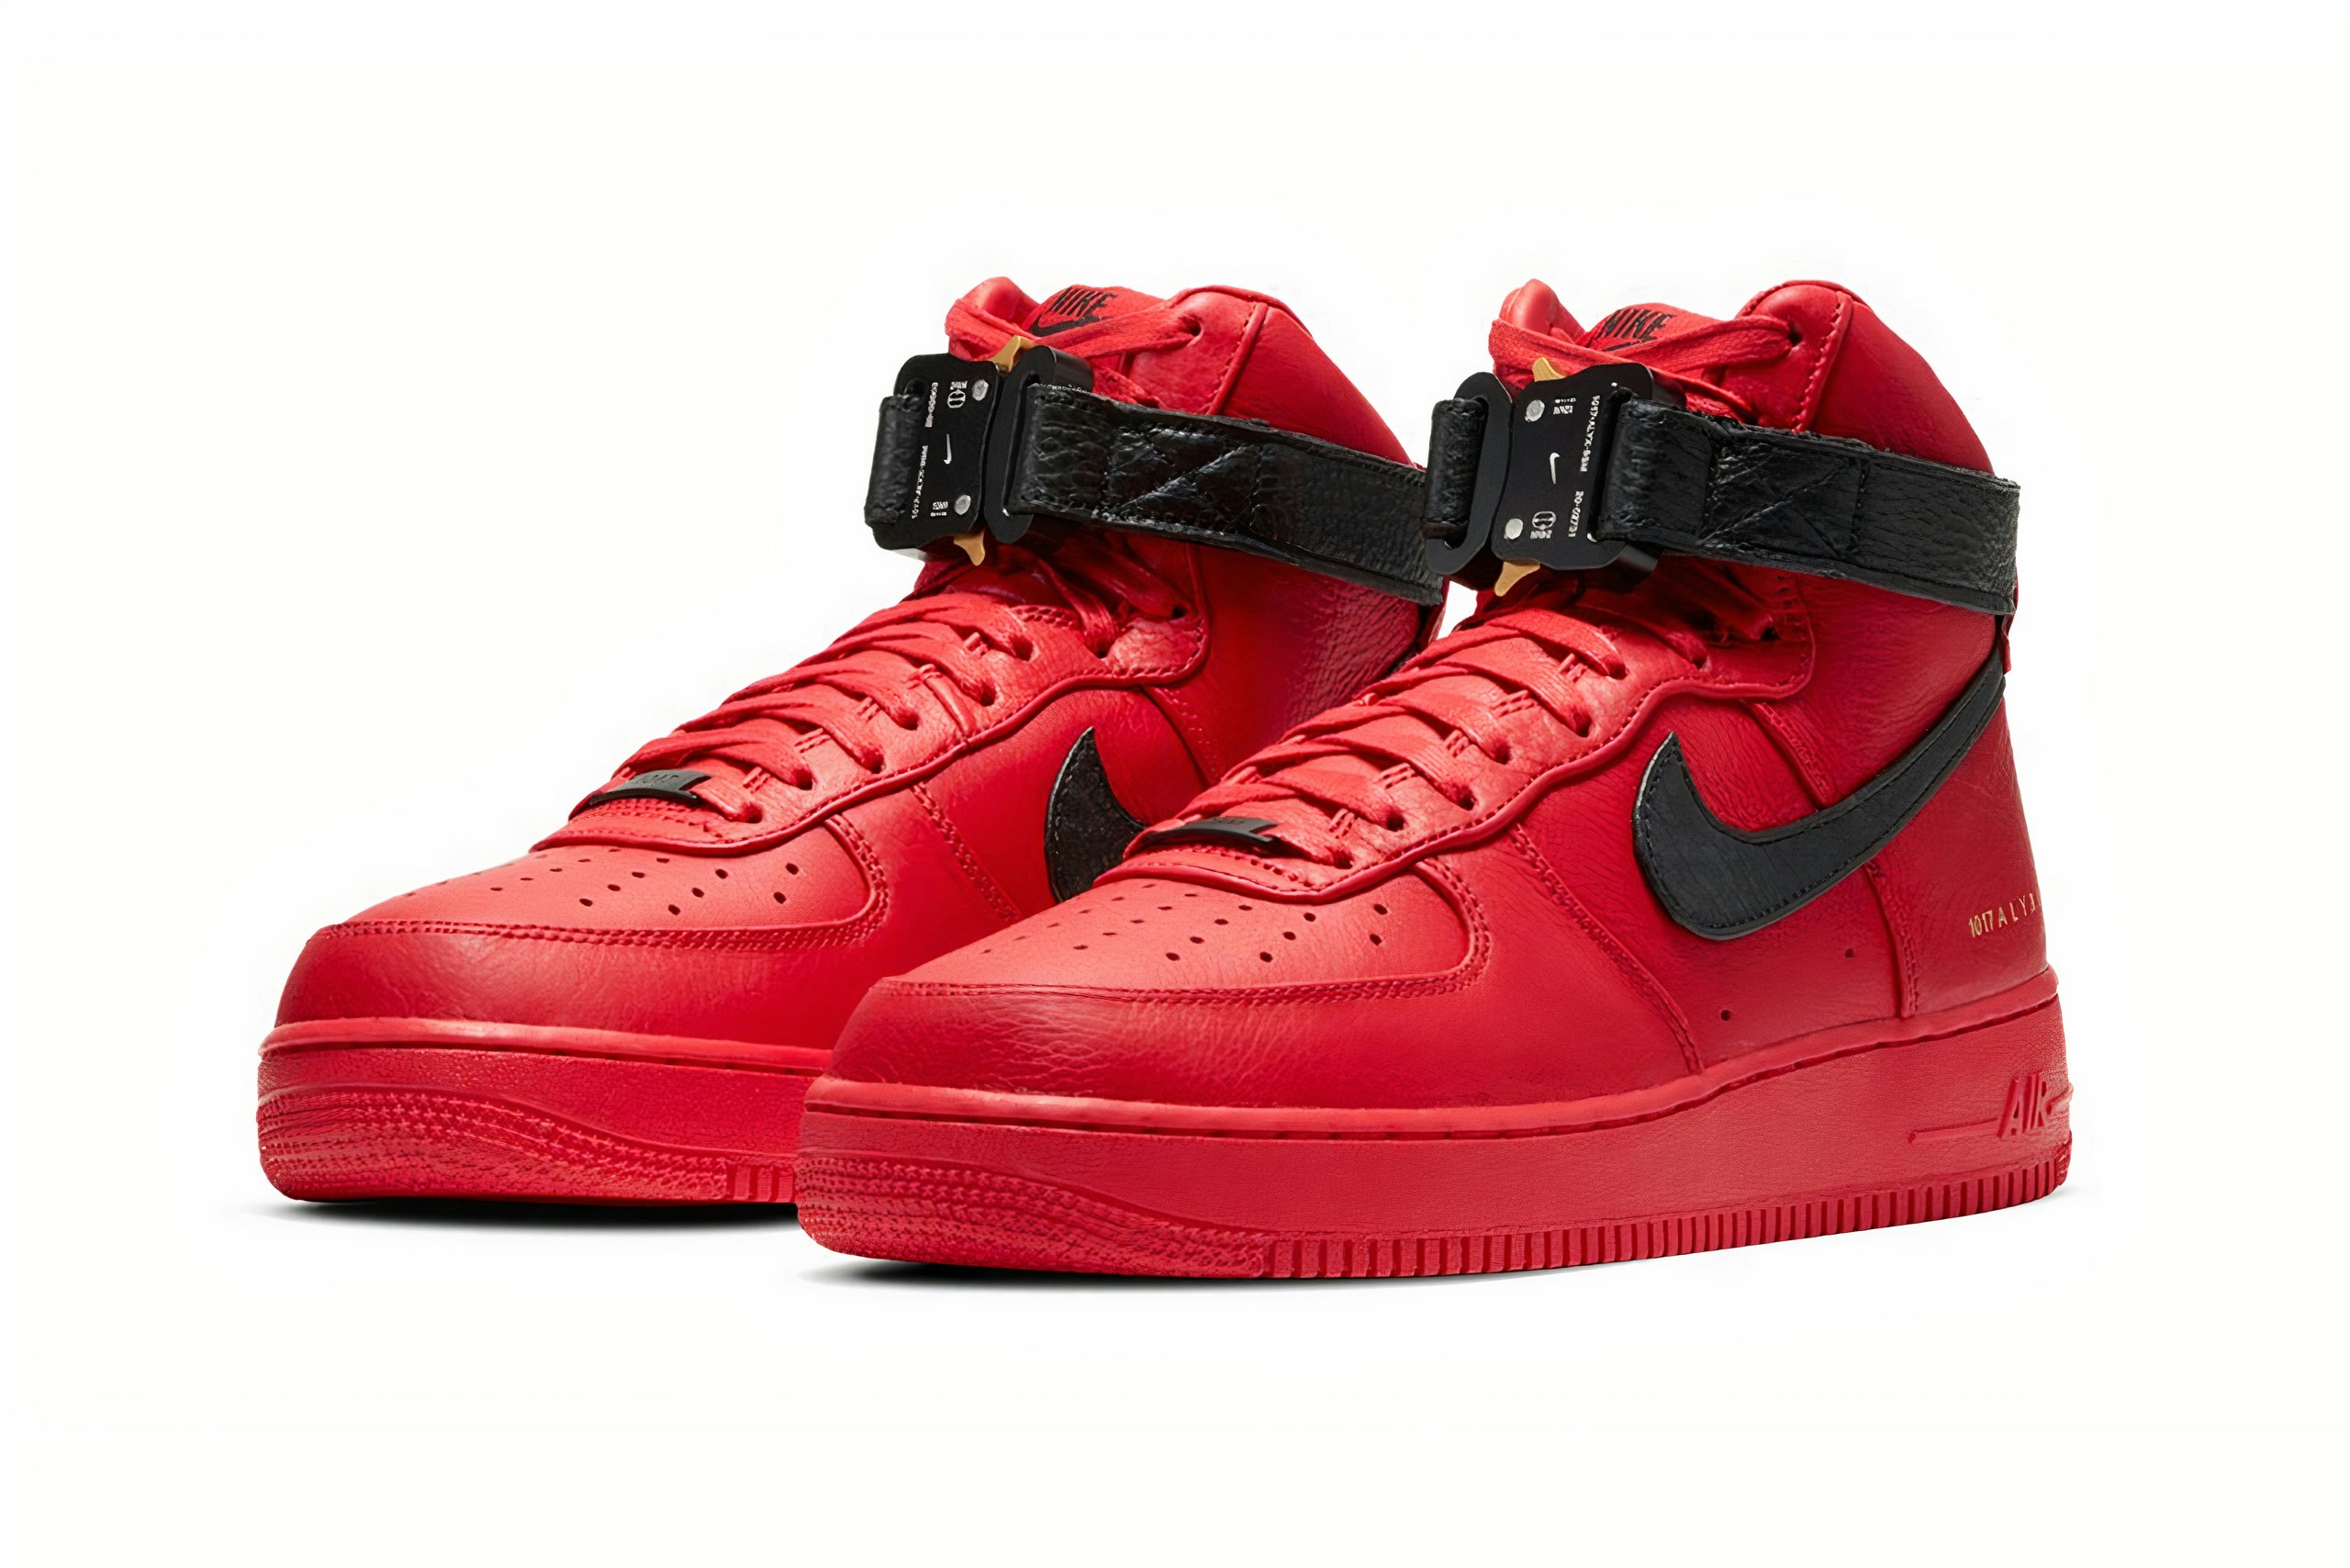 Alyx's buckled Nike Air Force 1 makes 